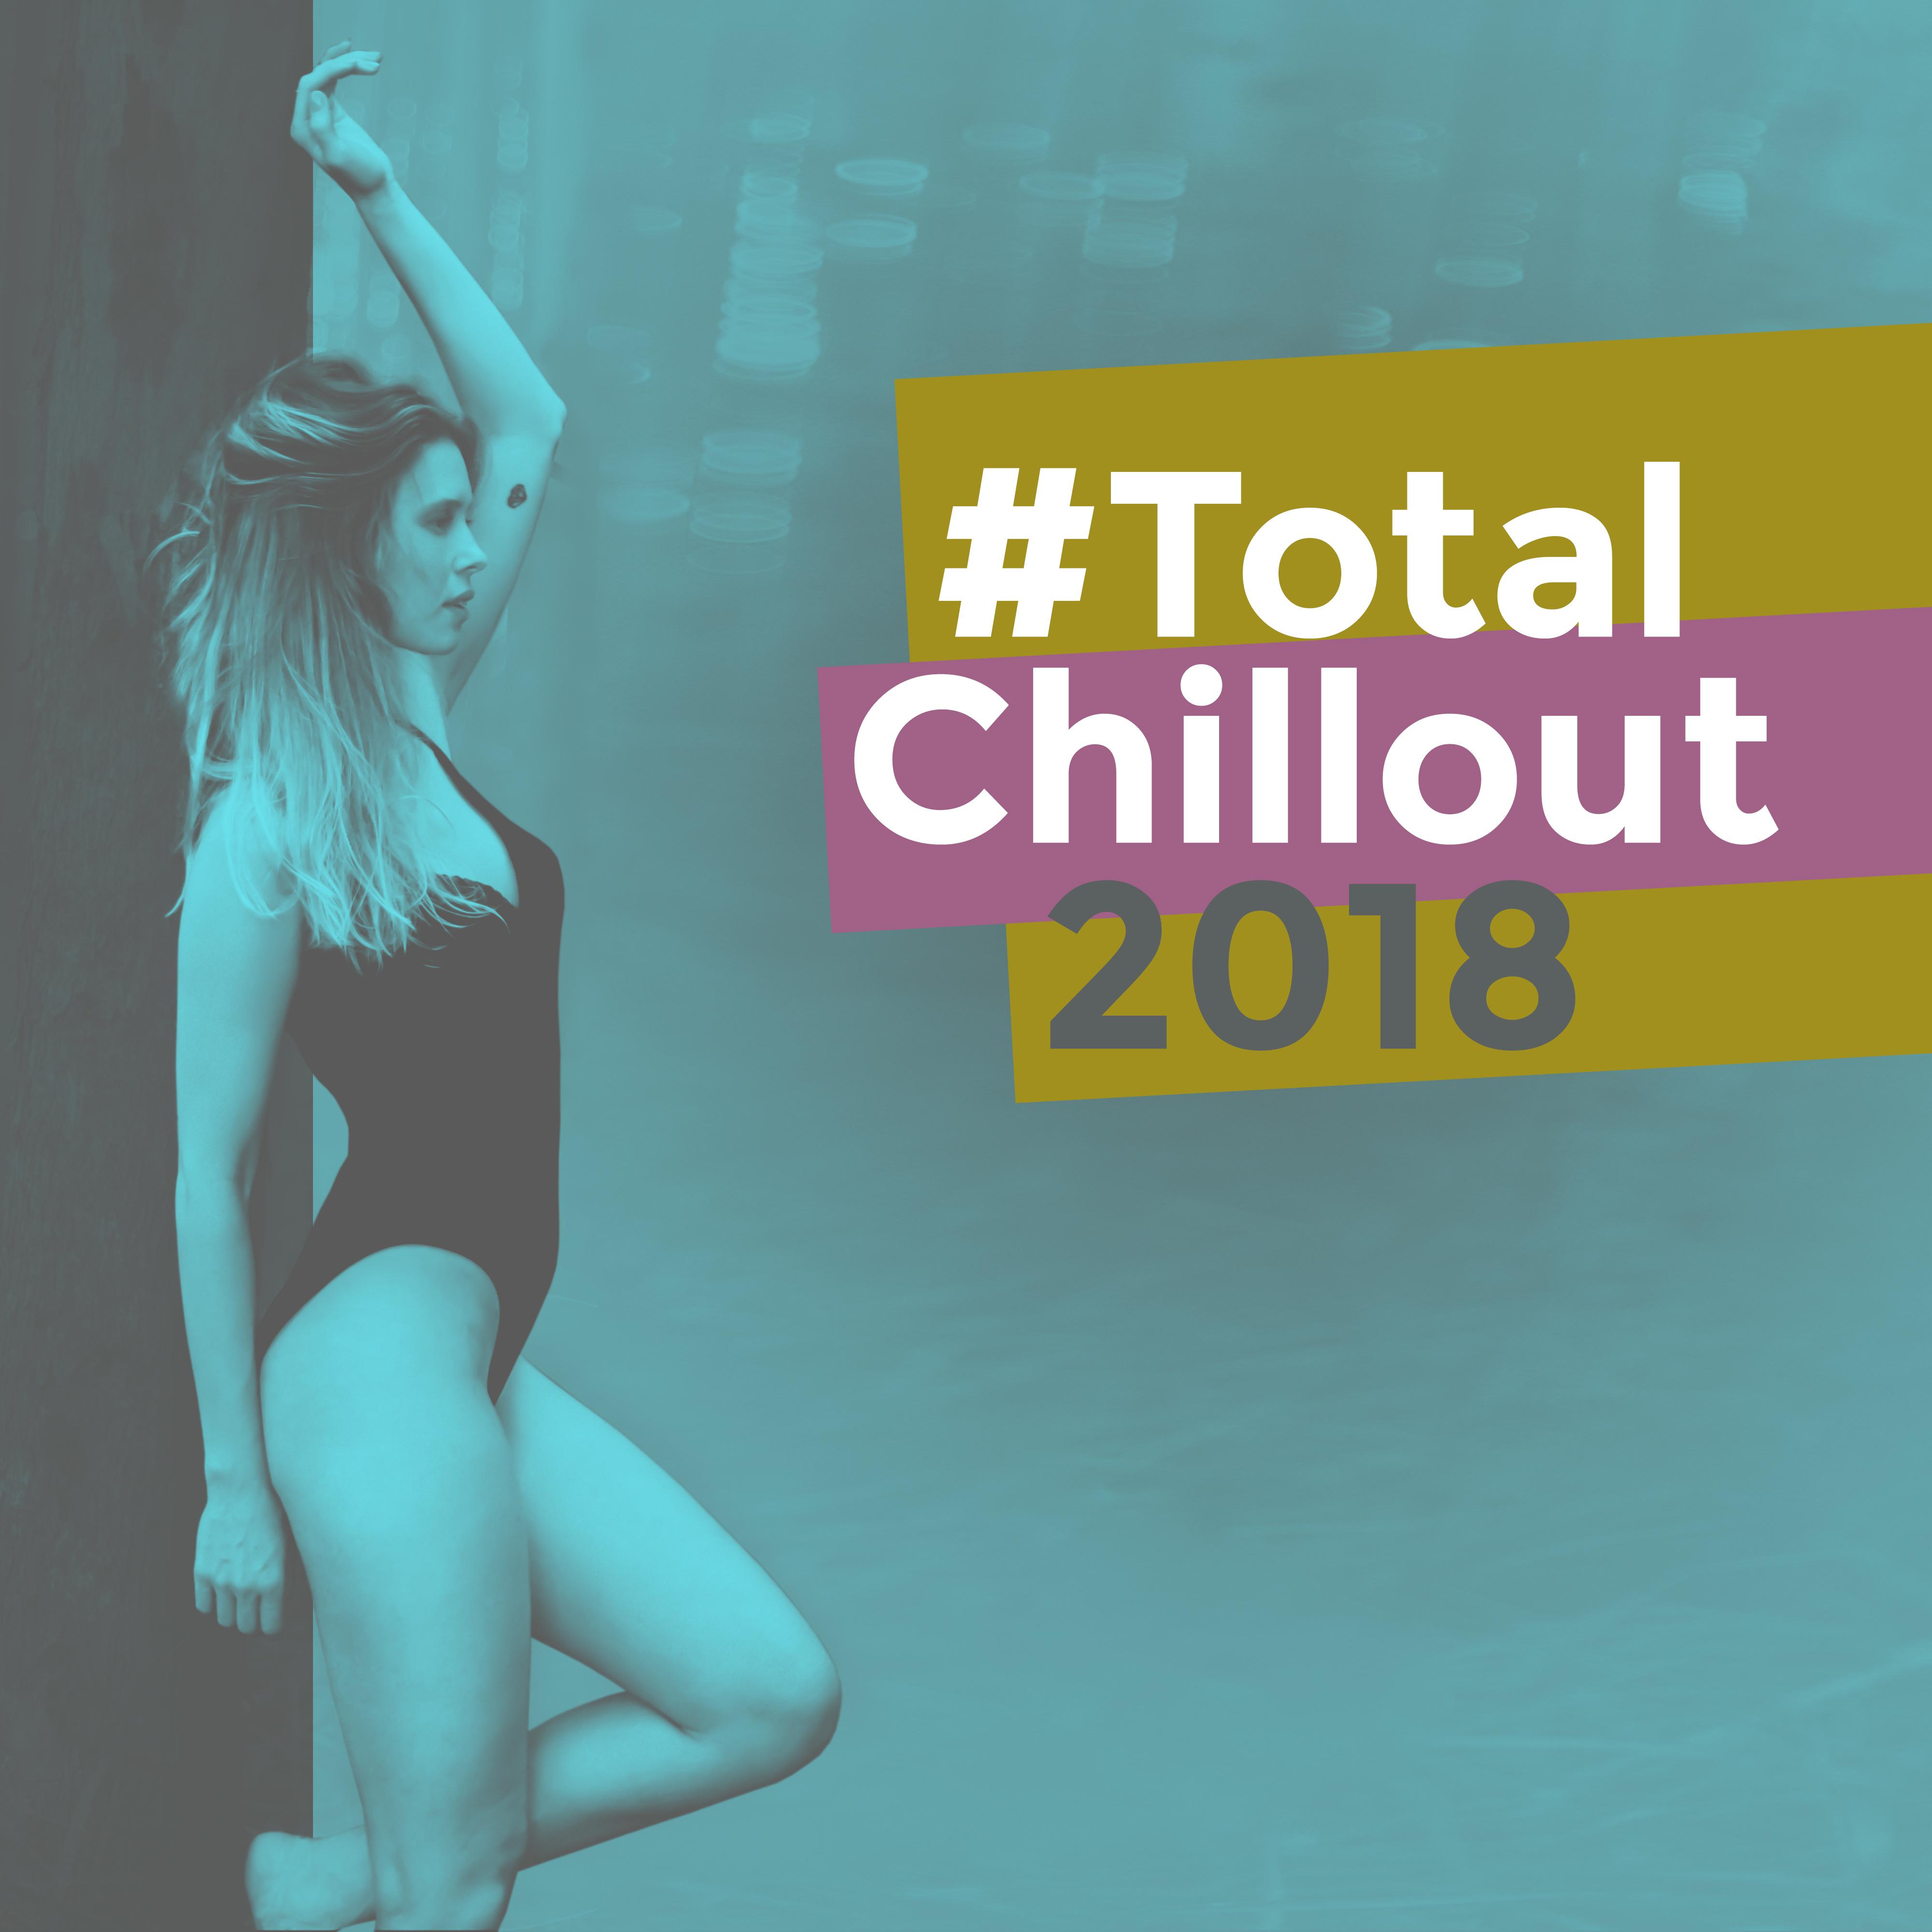 #Total Chillout 2018